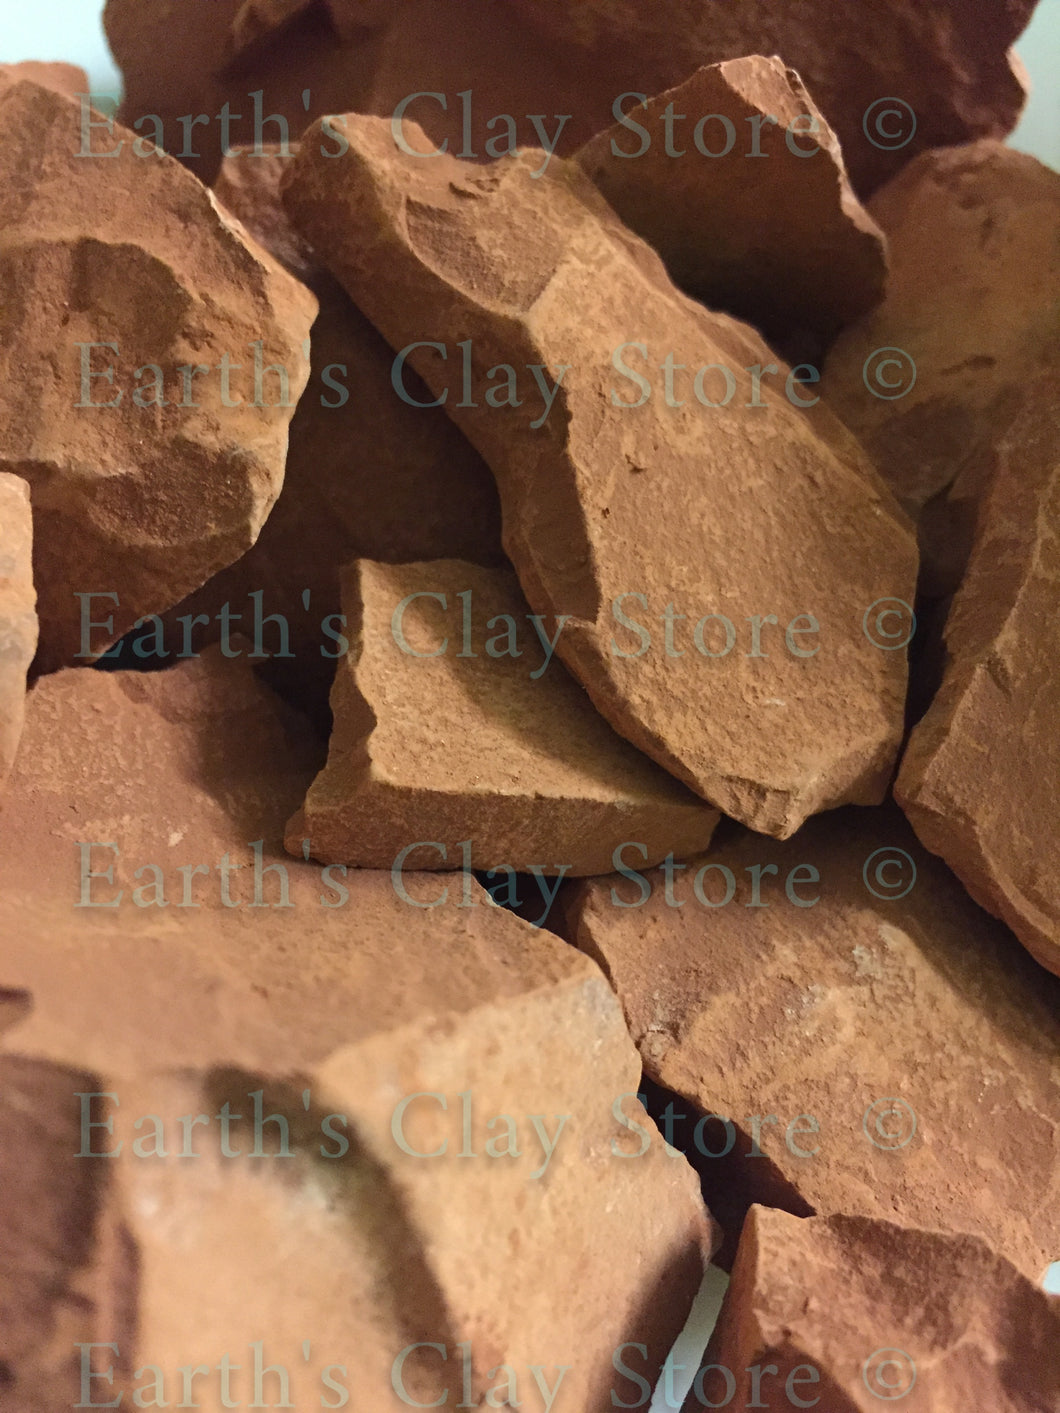 What Is Red Clay?